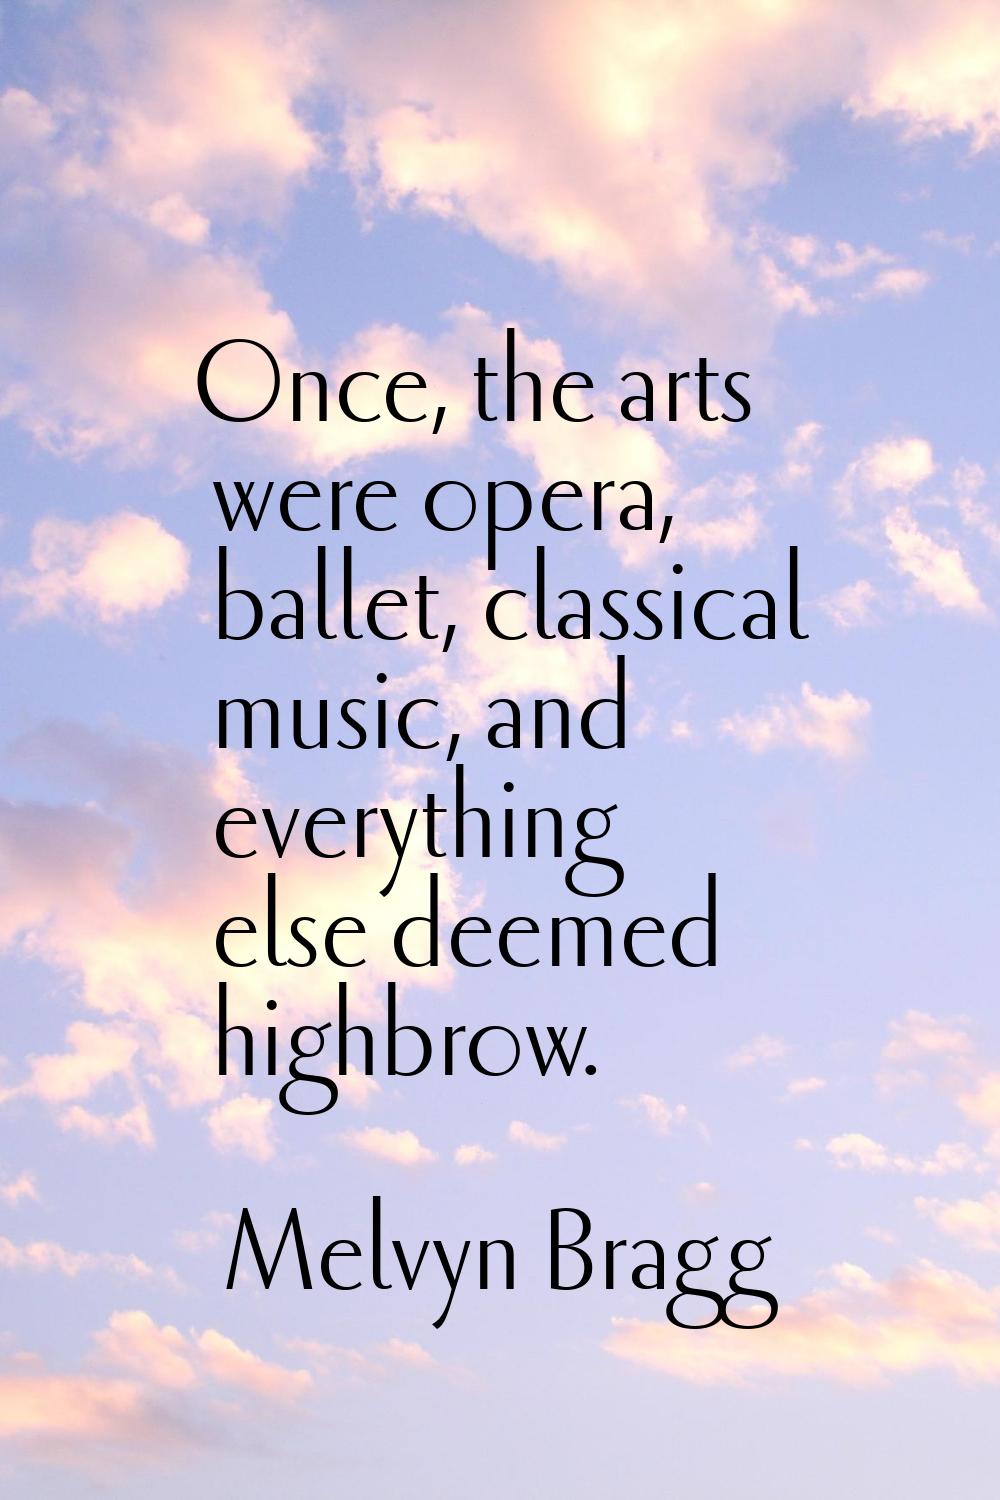 Once, the arts were opera, ballet, classical music, and everything else deemed highbrow.